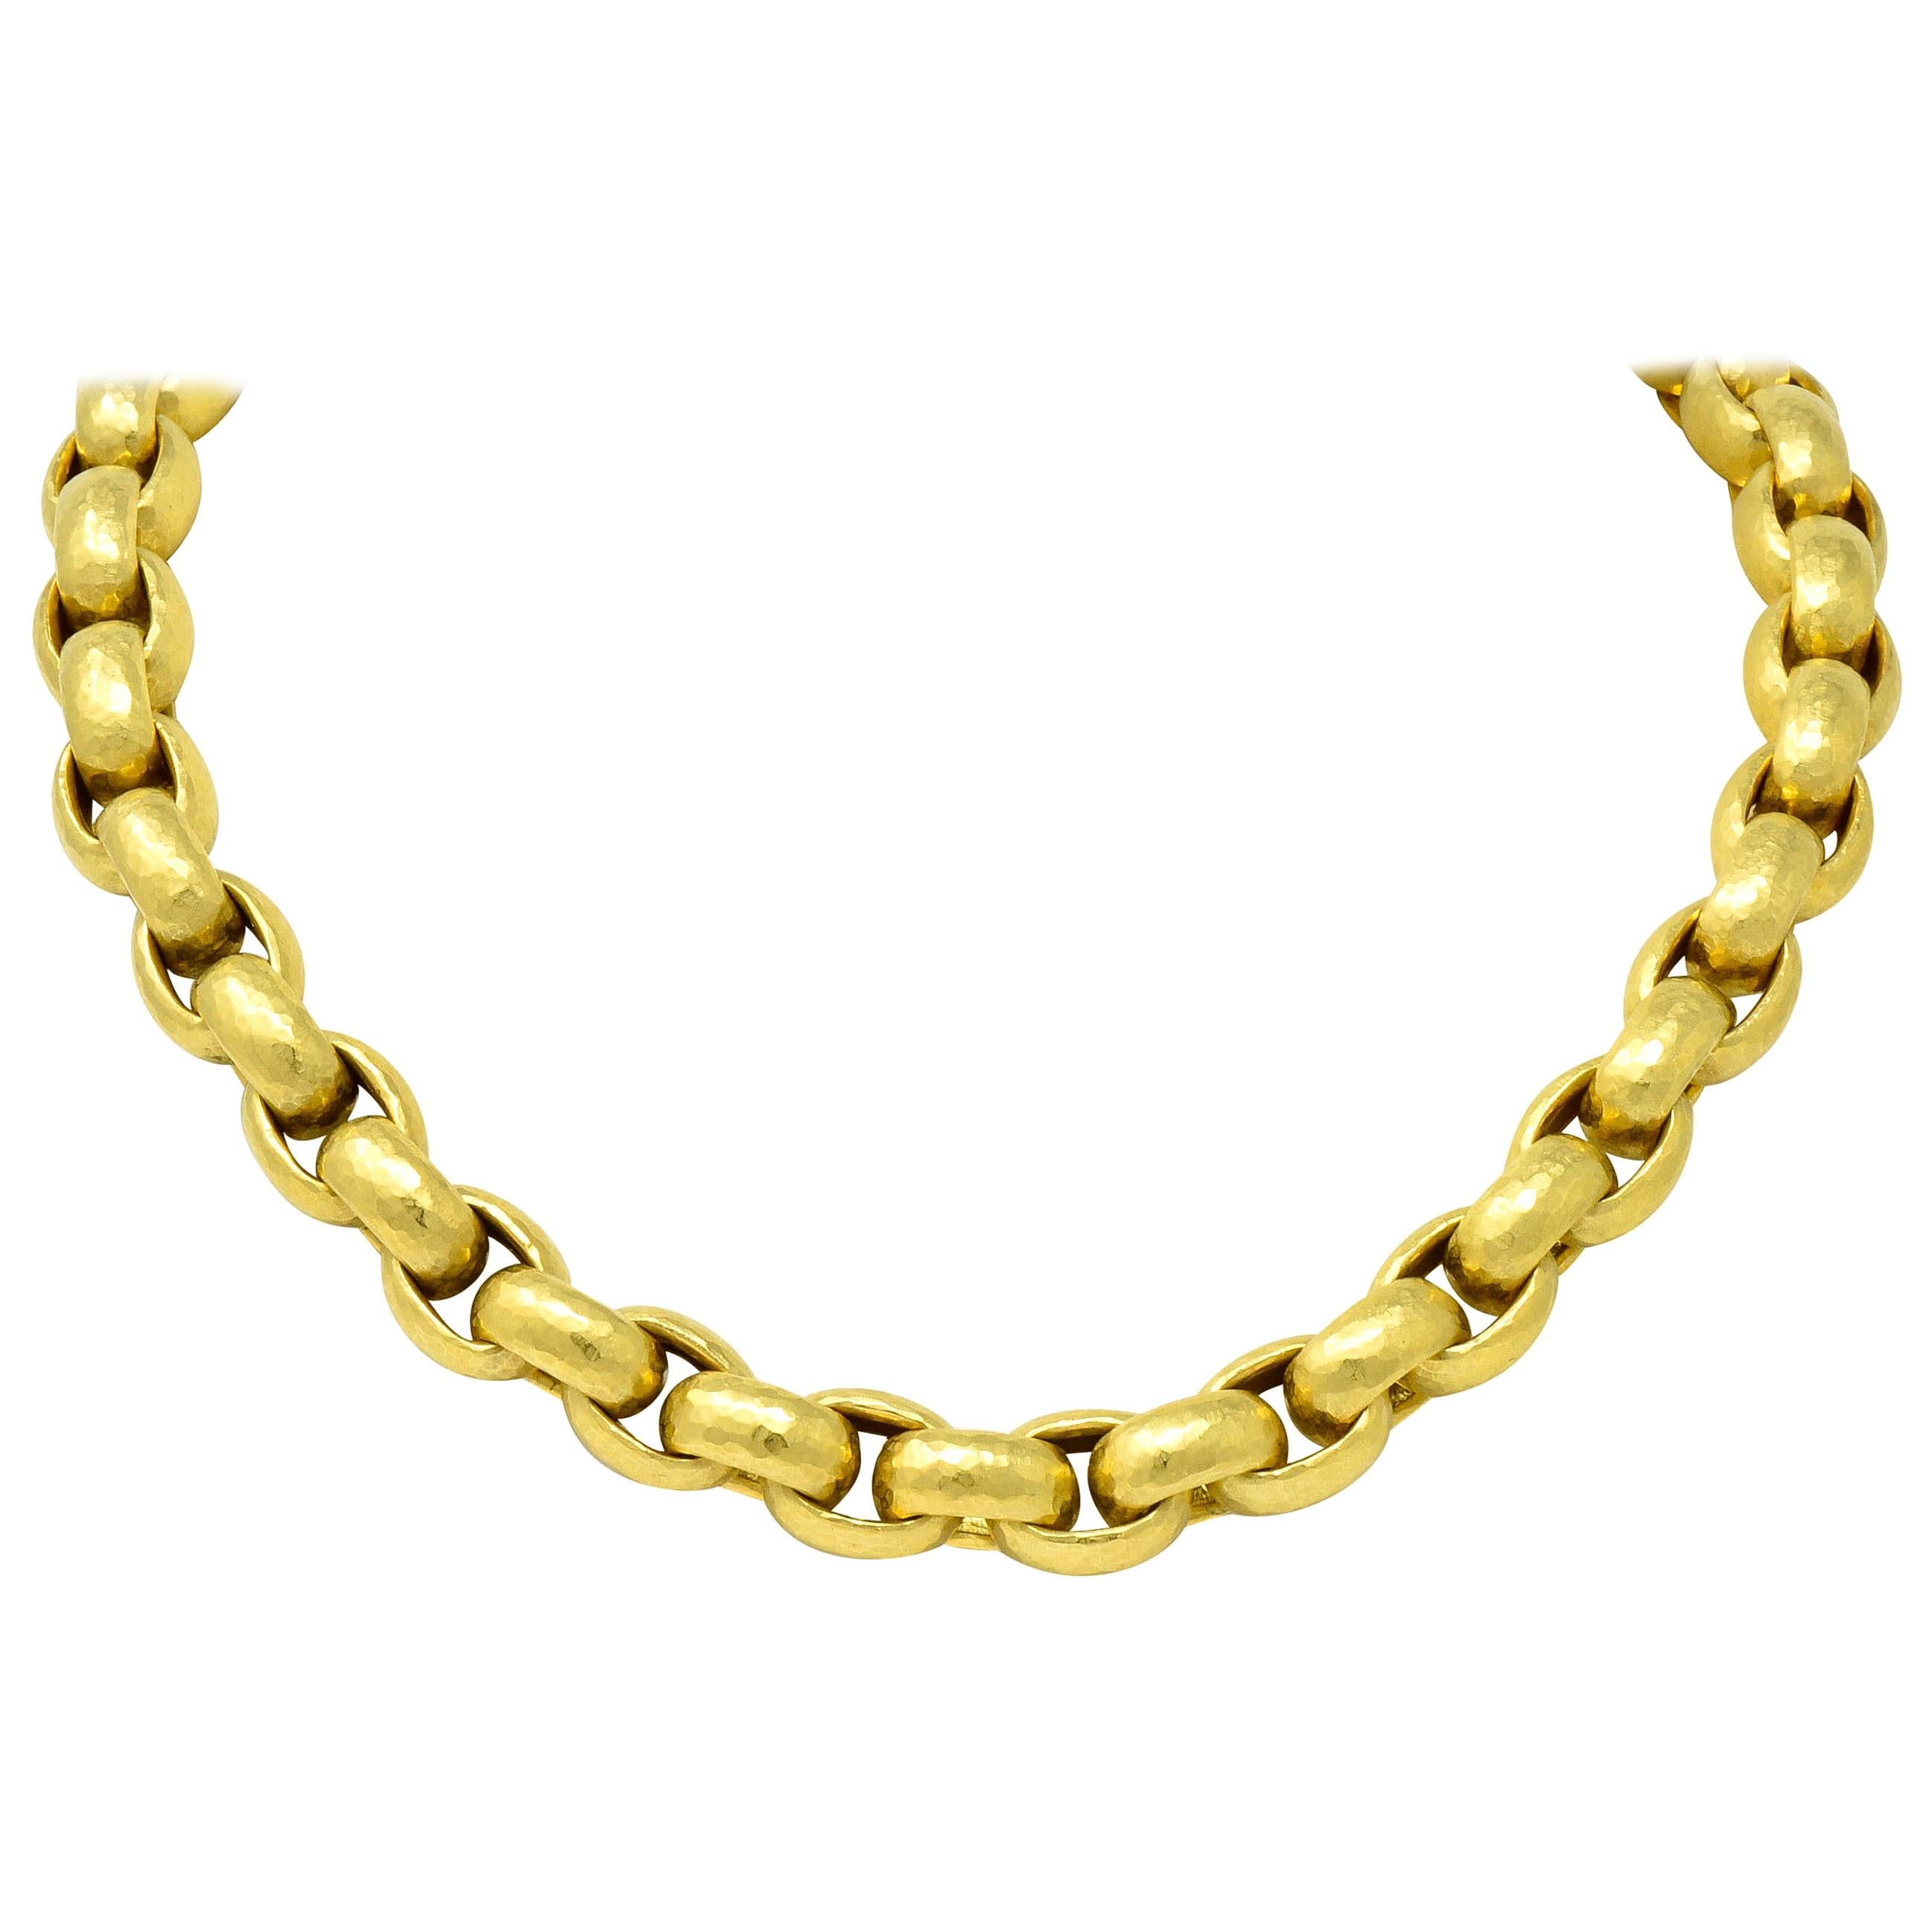 Paloma Picasso Tiffany & Co. 18 Karat Yellow Gold Hammered Link Necklace